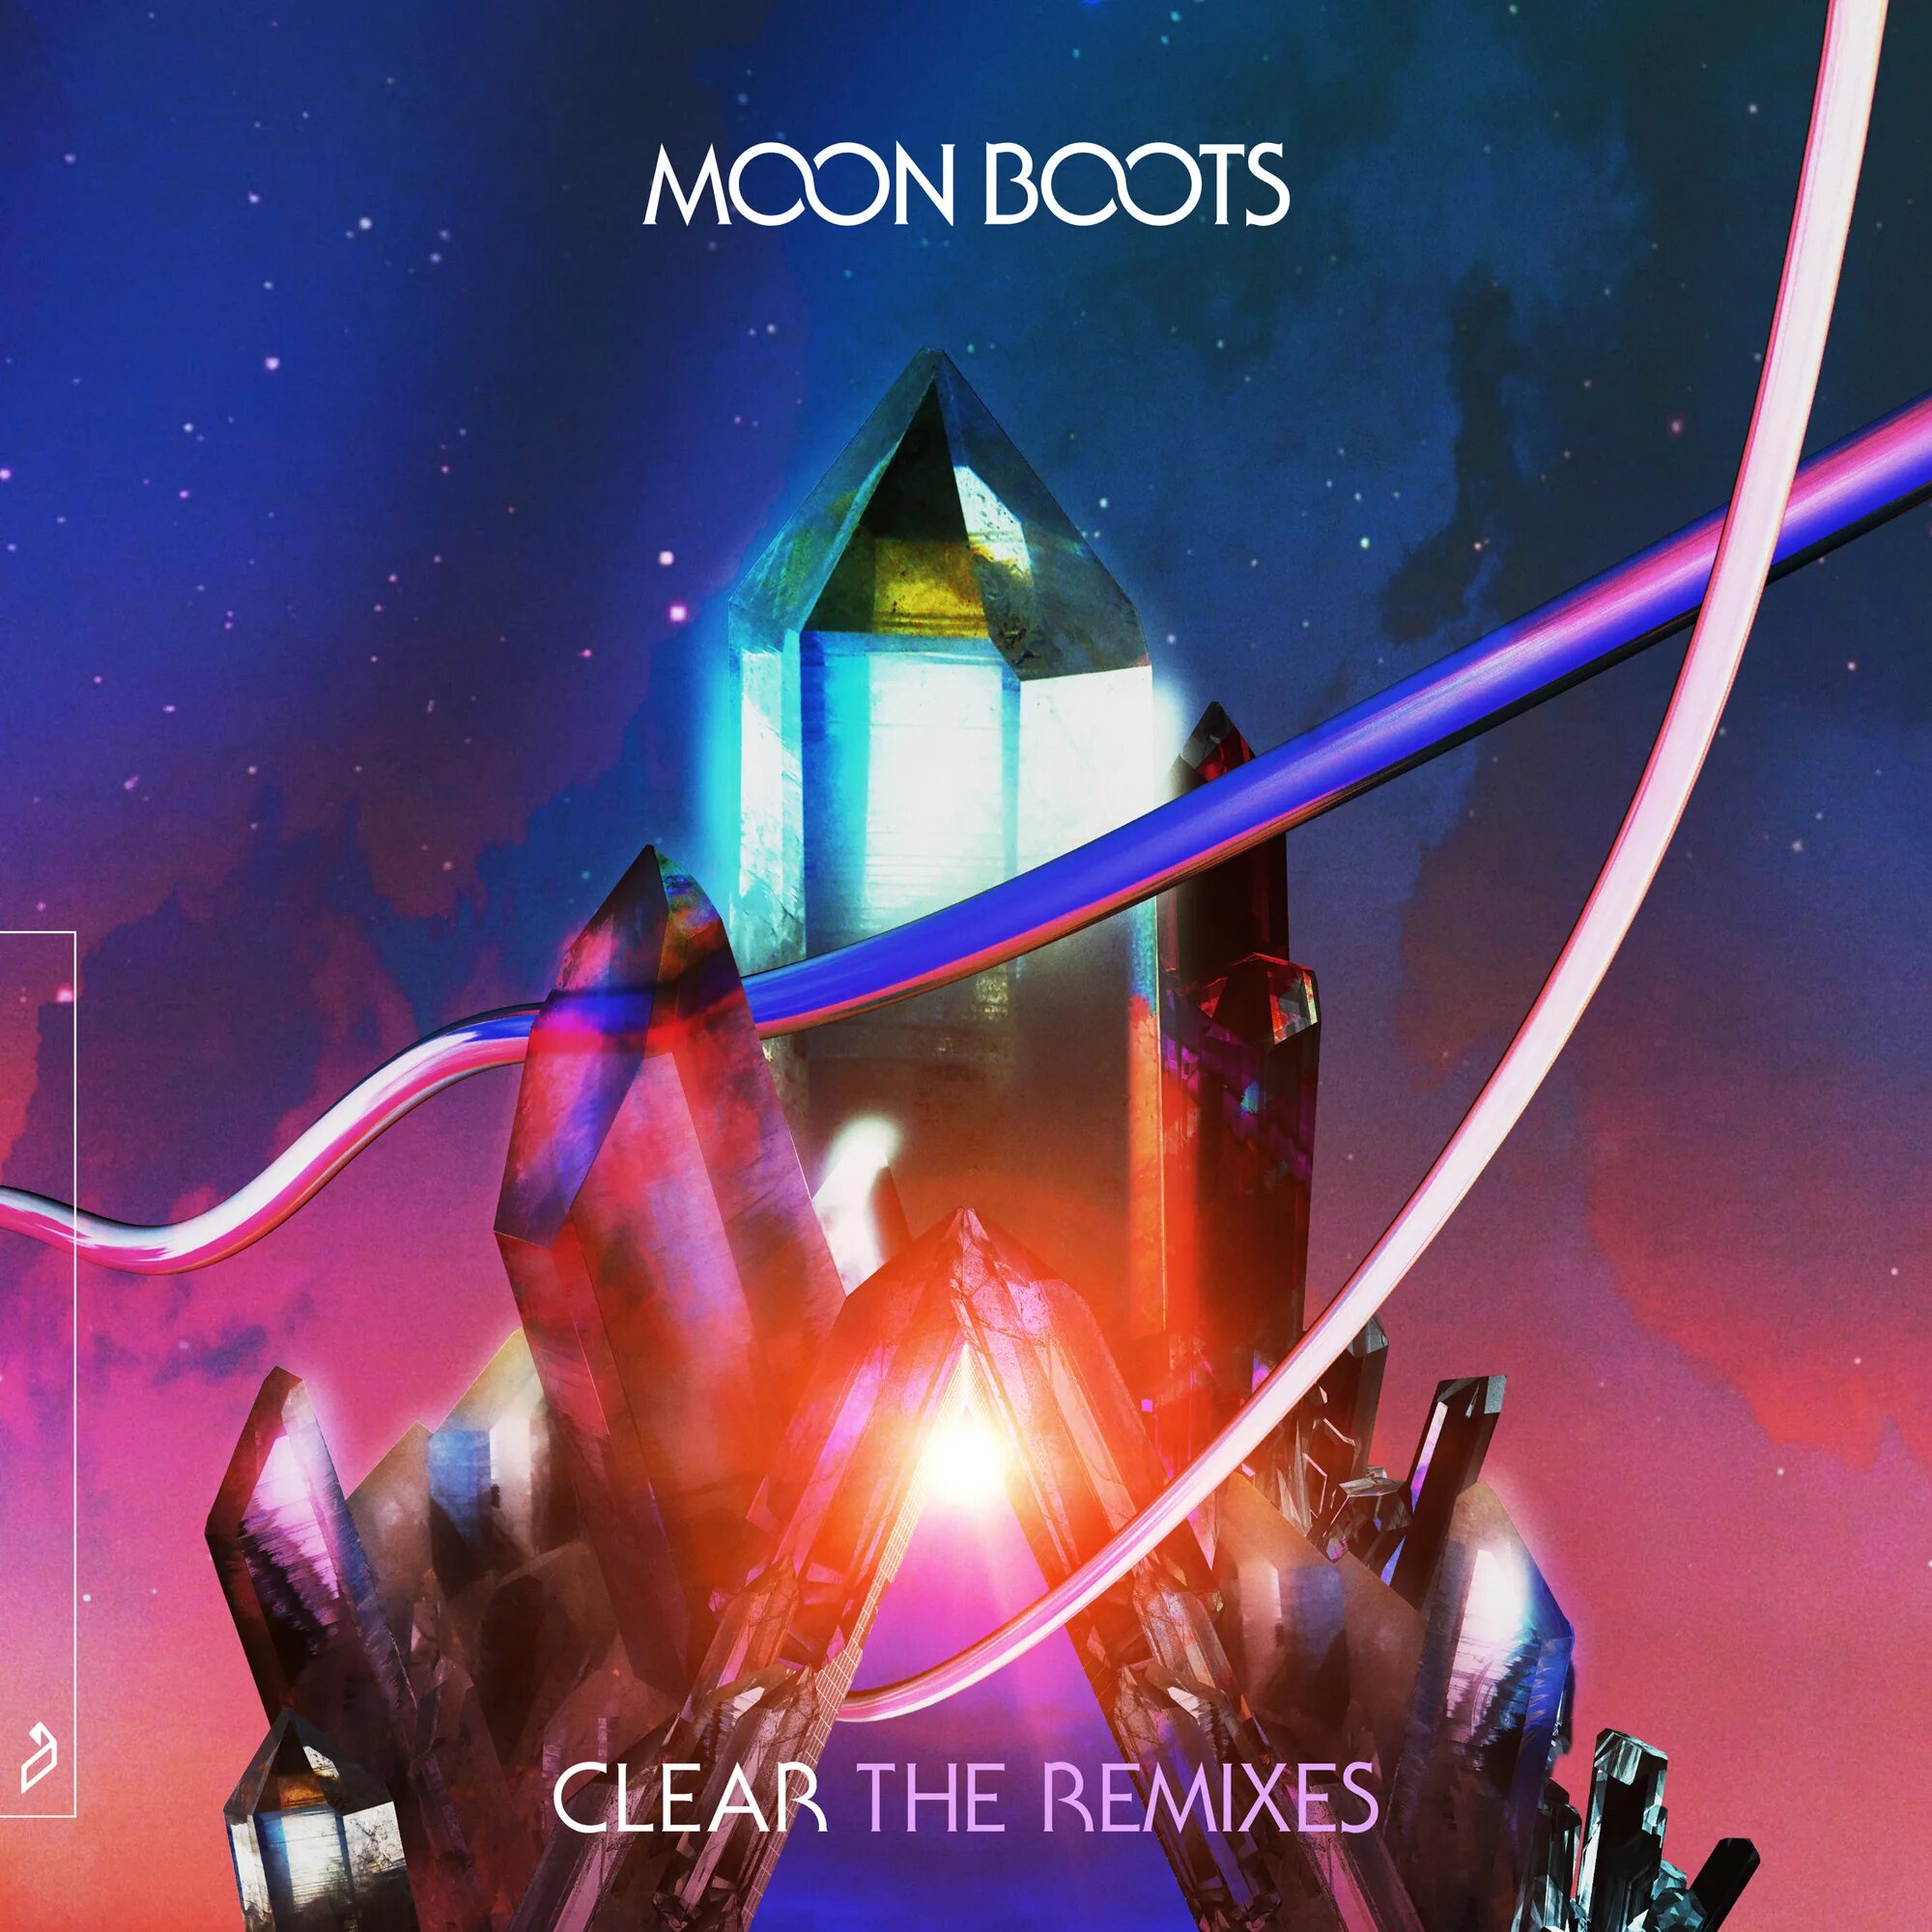 Clear ft. Cleared Remix обложка. Moon Boots - keep the Faith feat. Nic Hanson (256 Kbps). Песня Cleared Remix. Cleared Remix.